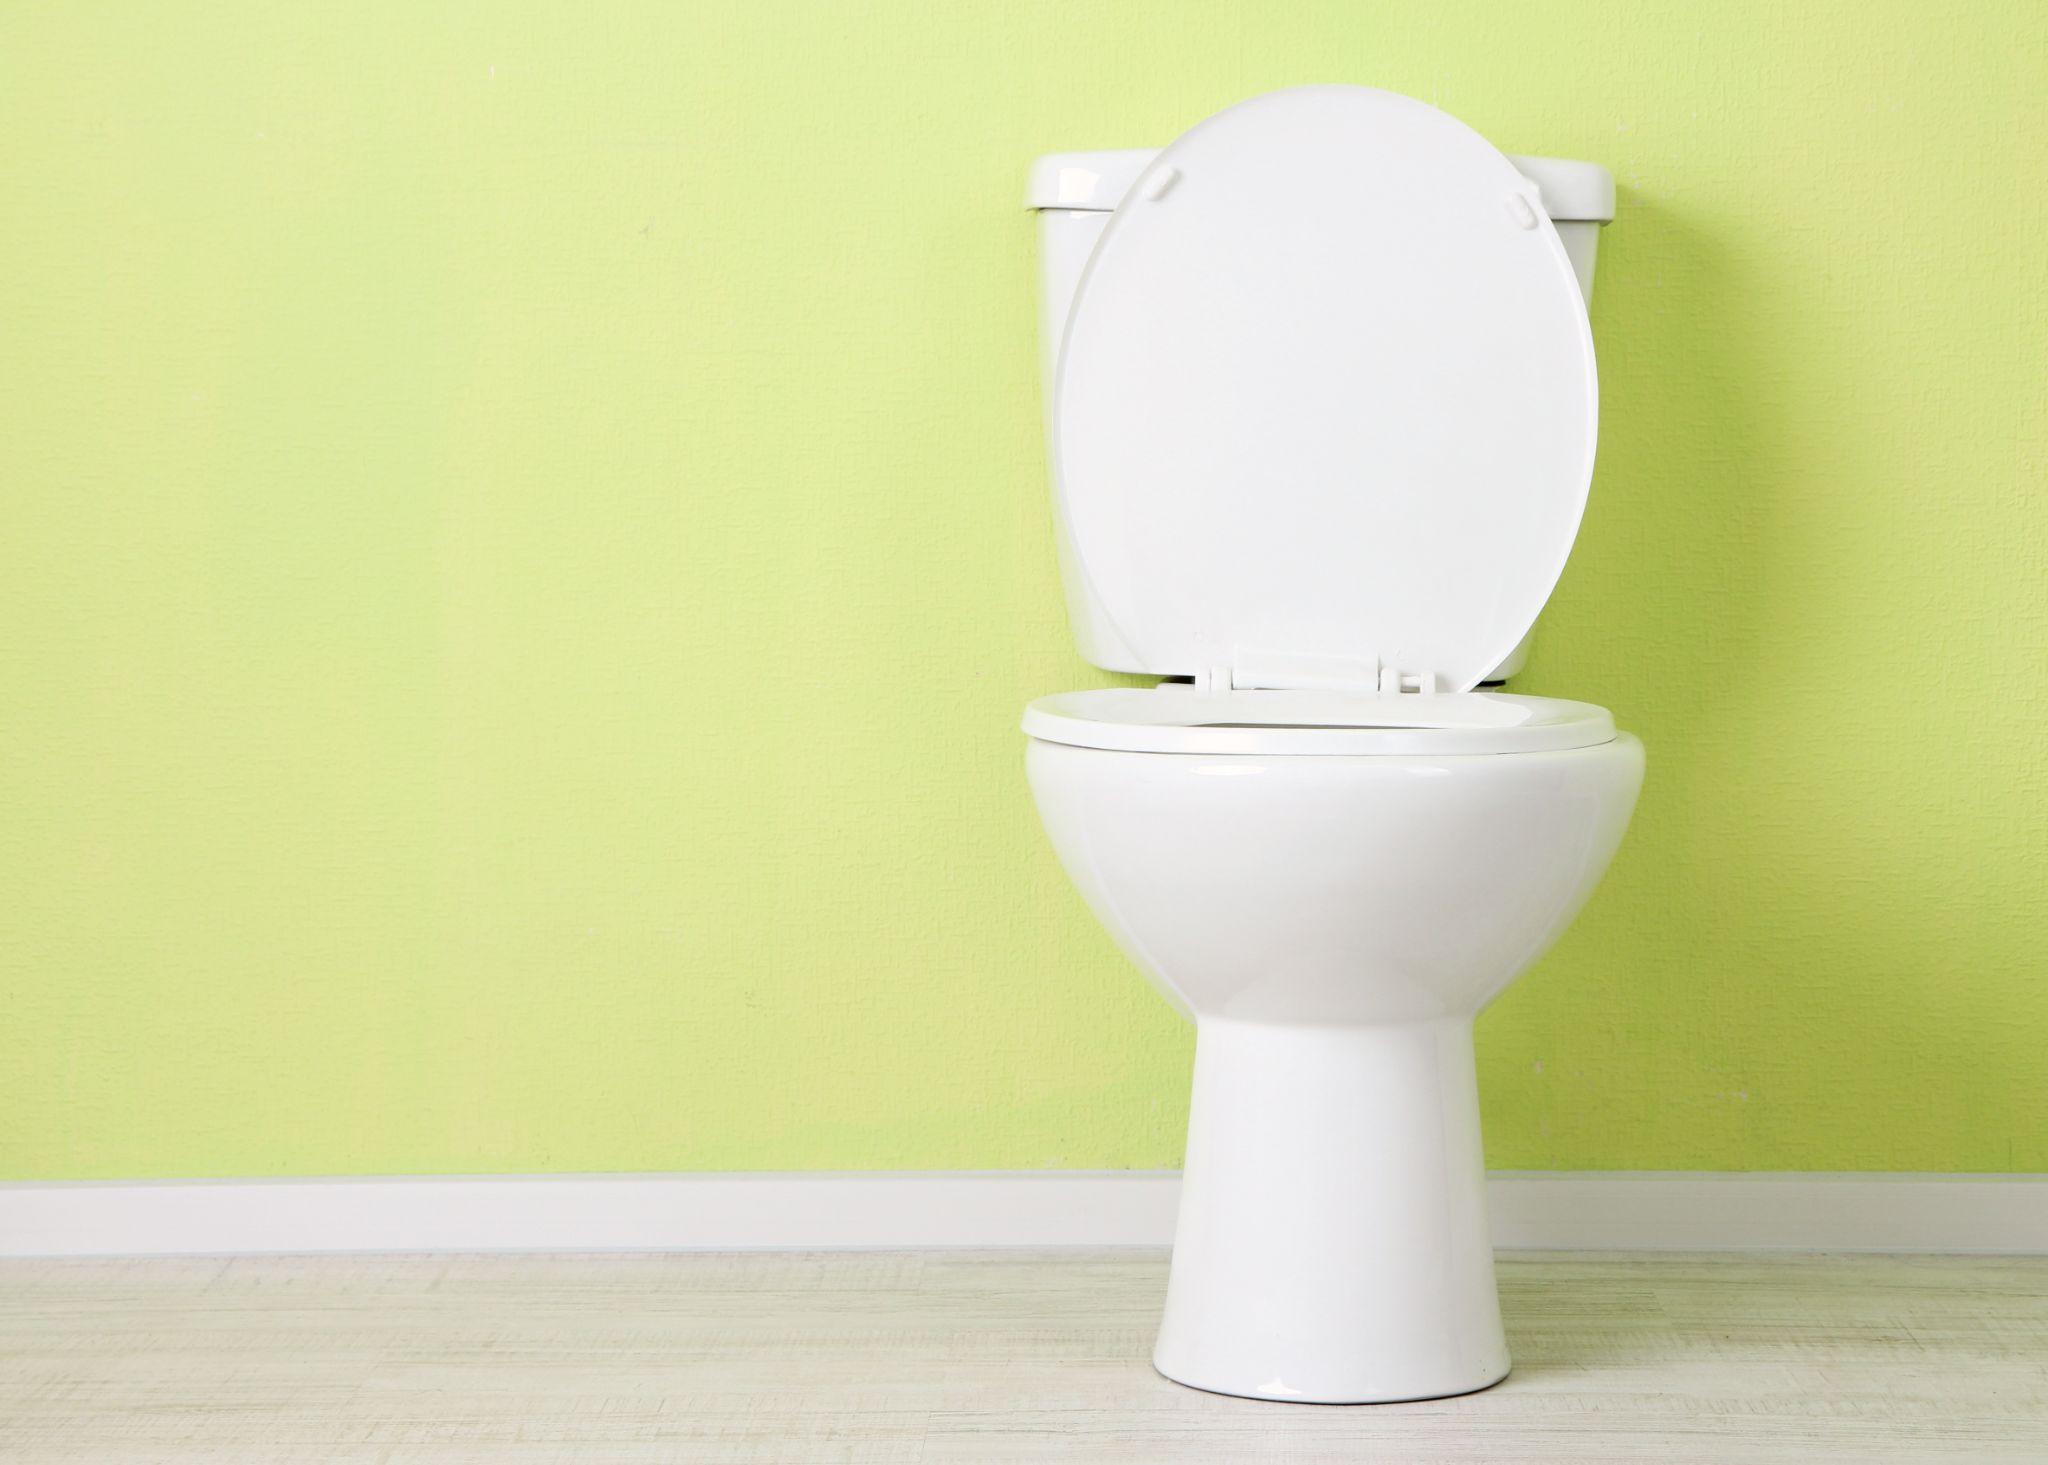 Clogged Toilet Repair in San Antonio, TX, by Will Fix It